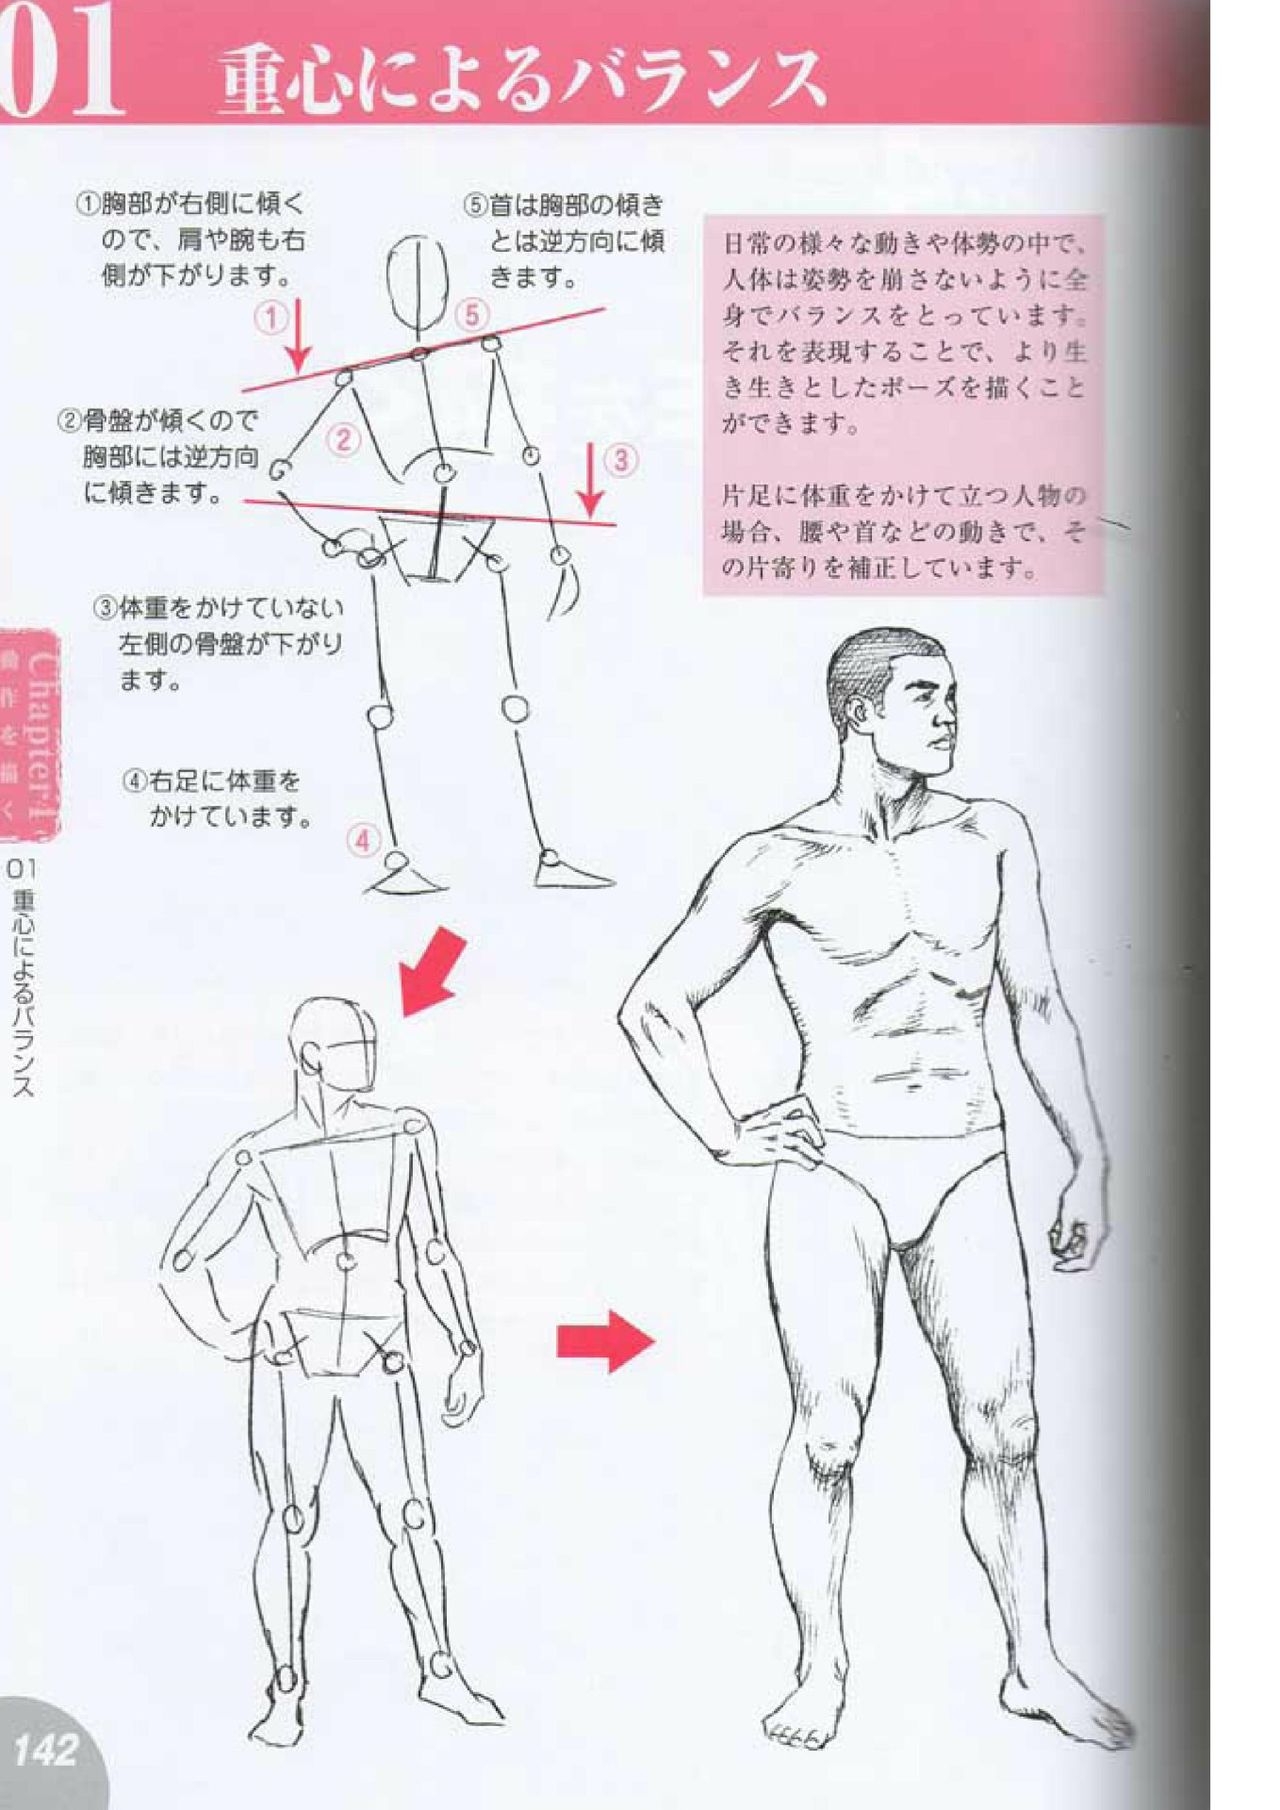 How to draw a character drawing from a human anatomical chart 140